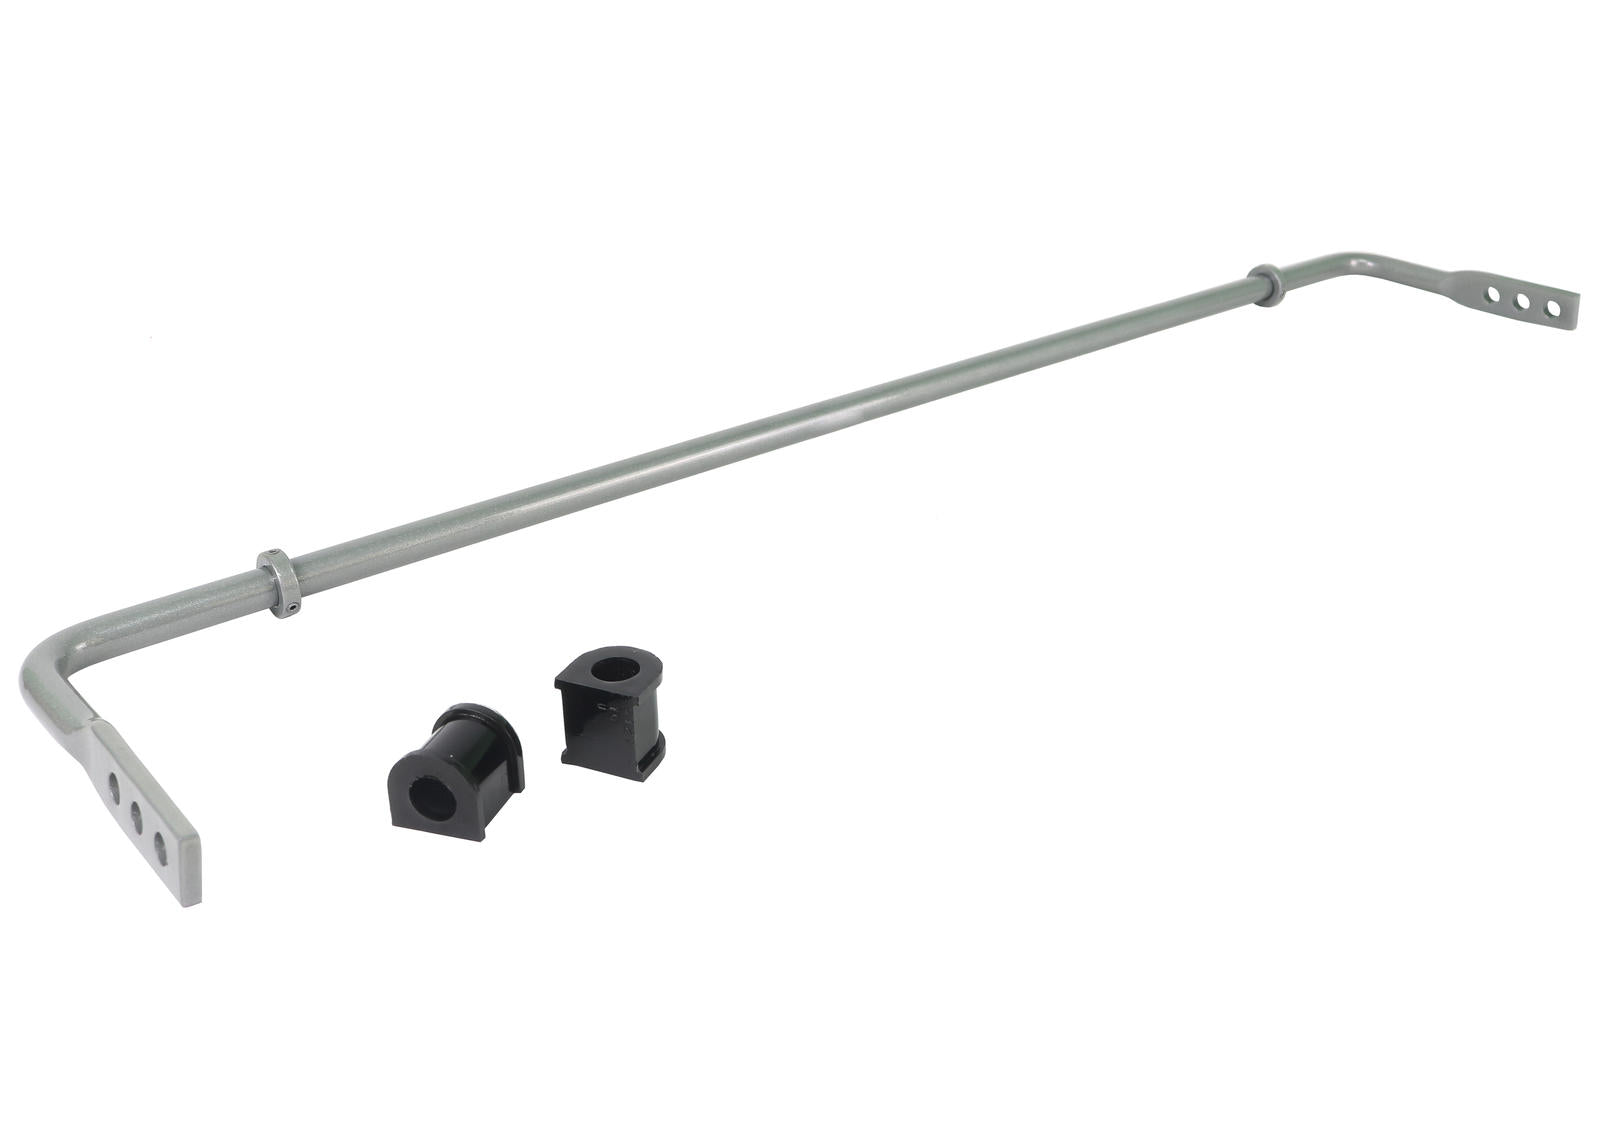 Rear Sway Bar - 16mm 3 Point Adjustable To Suit Mazda MX-5 NA, NB